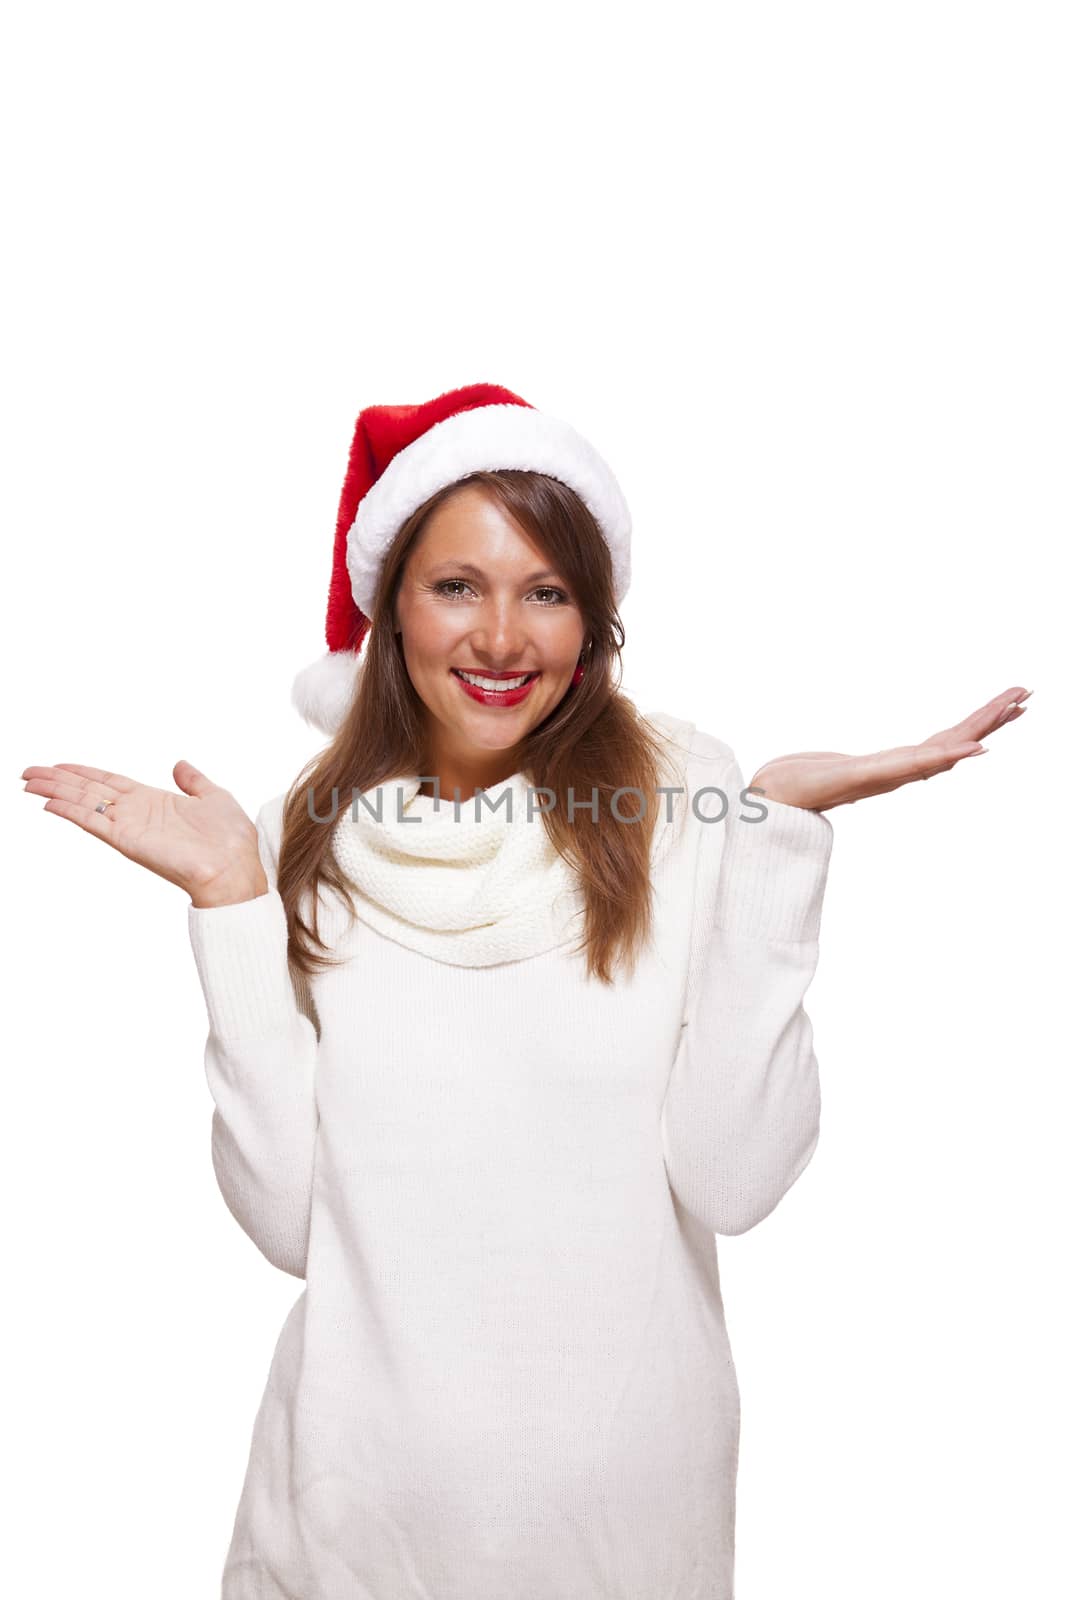 Attractive woman wearing a festive red Santa hat by juniart